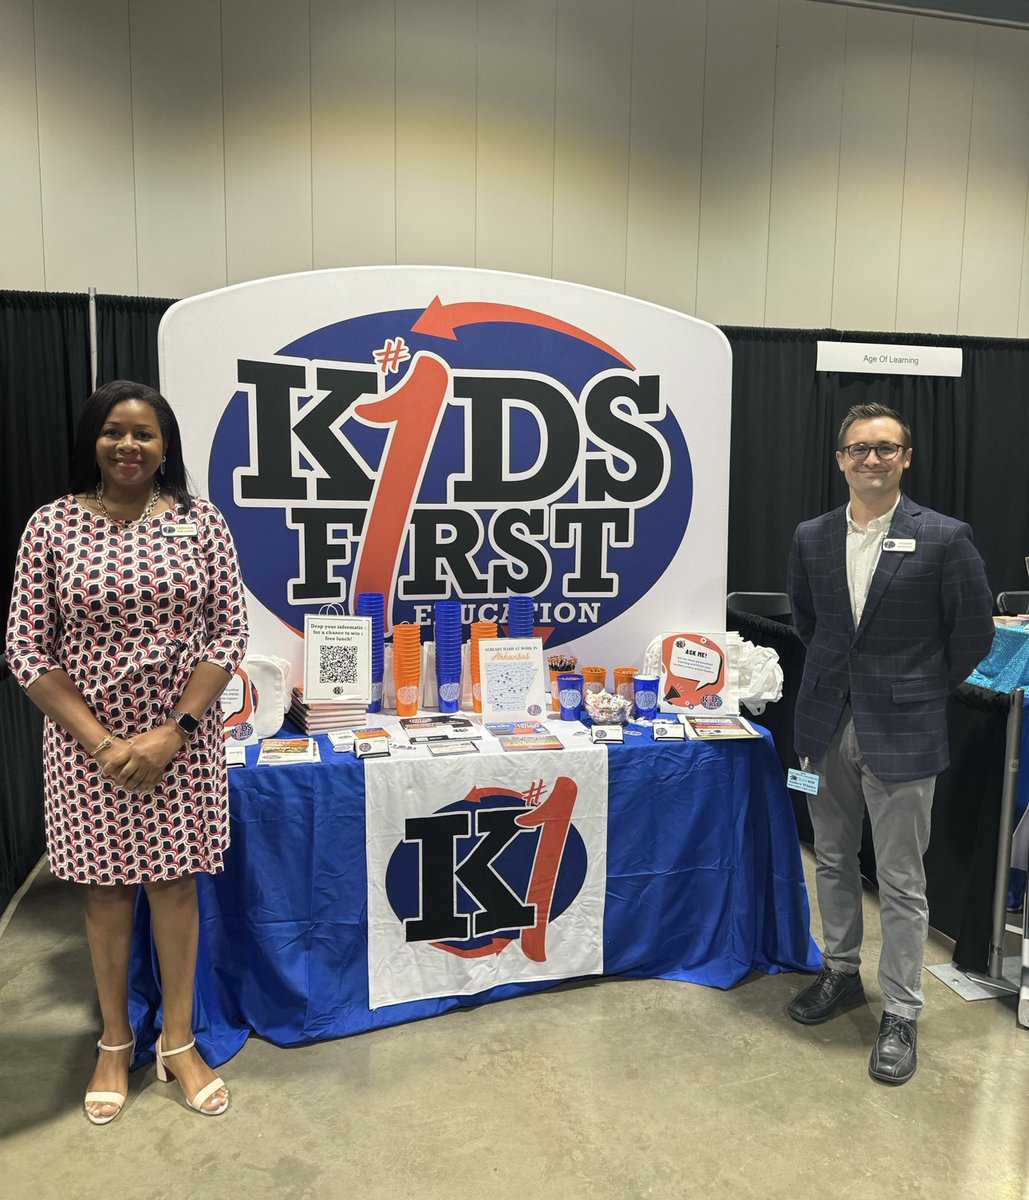 #KidsFirst team members, Cassandra Williams and Andrew Whitley are excited to meet all the federal coordinators at the AAFC Conference in Hot Springs! Come see us! #KidsFirstAlways #ARDivision